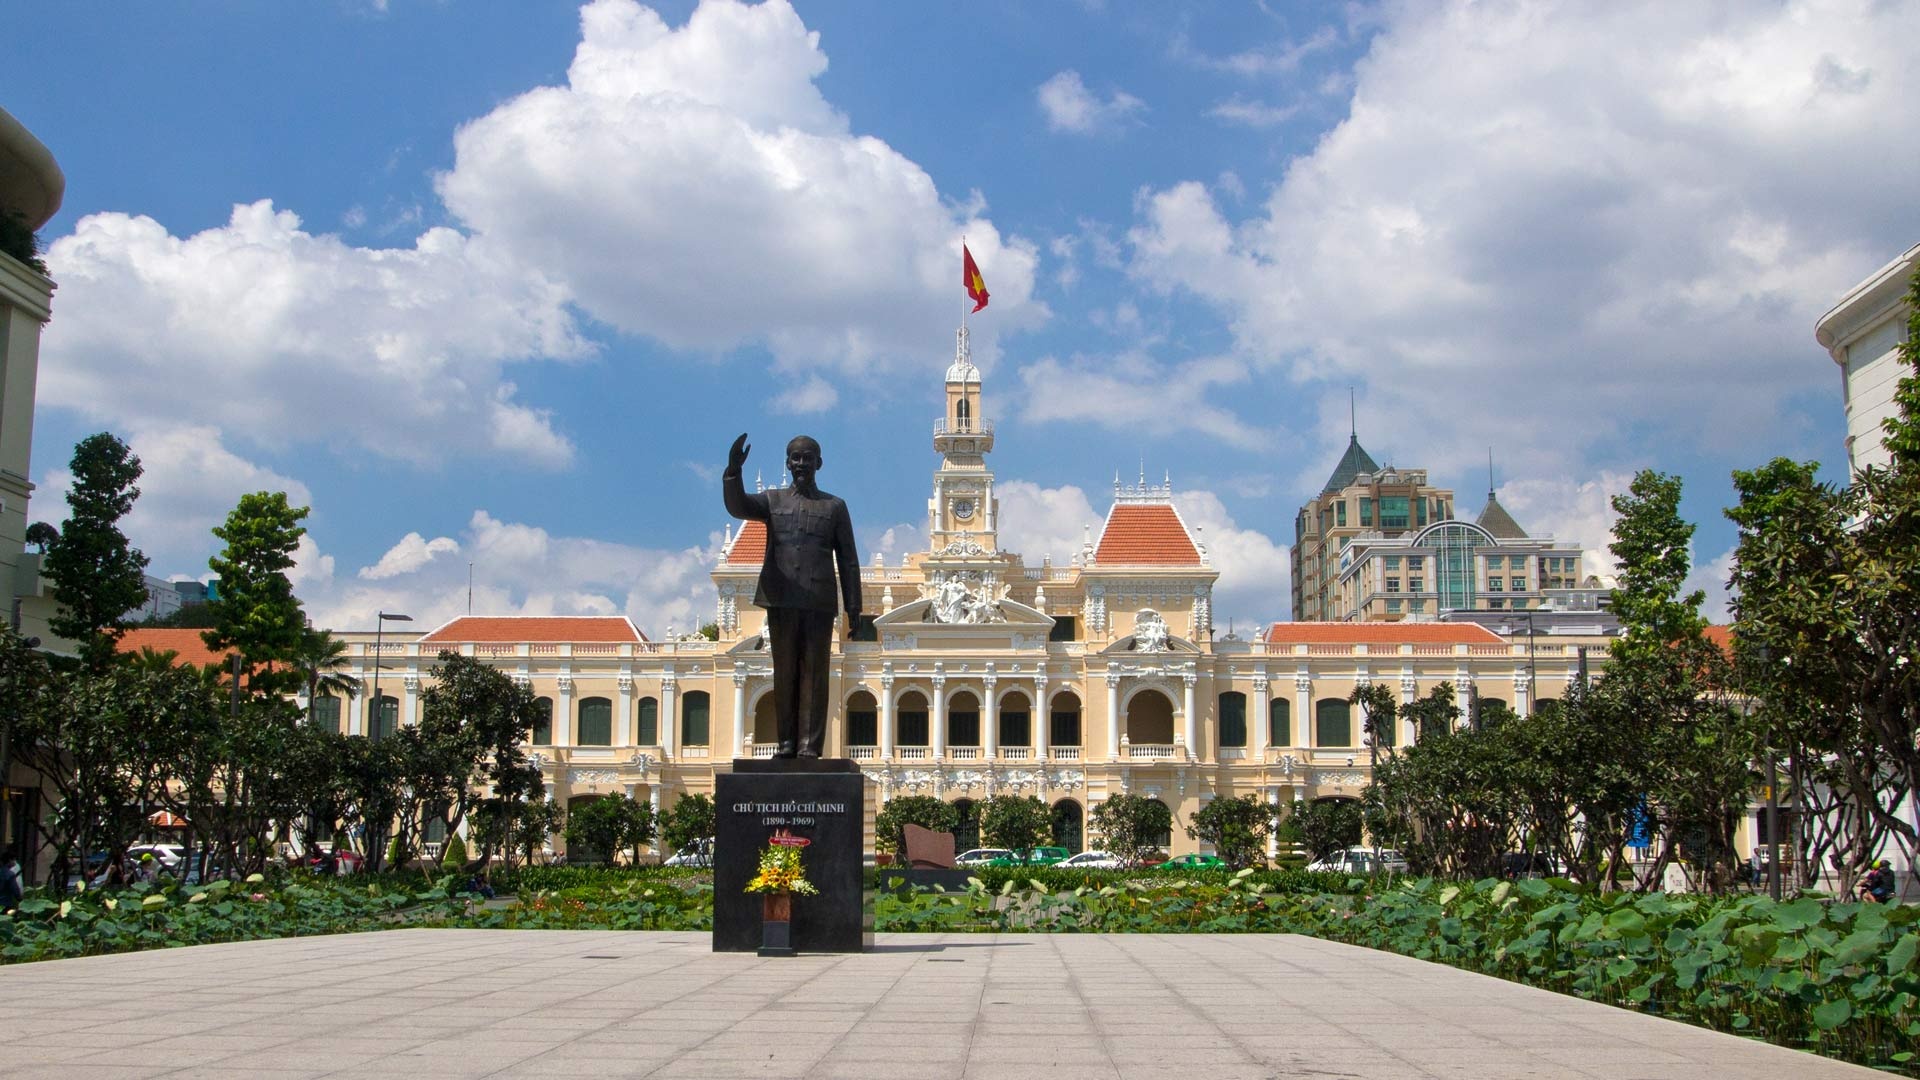 Things to do, Ho Chi Minh City, Saigon attractions, Local experiences, 1920x1080 Full HD Desktop